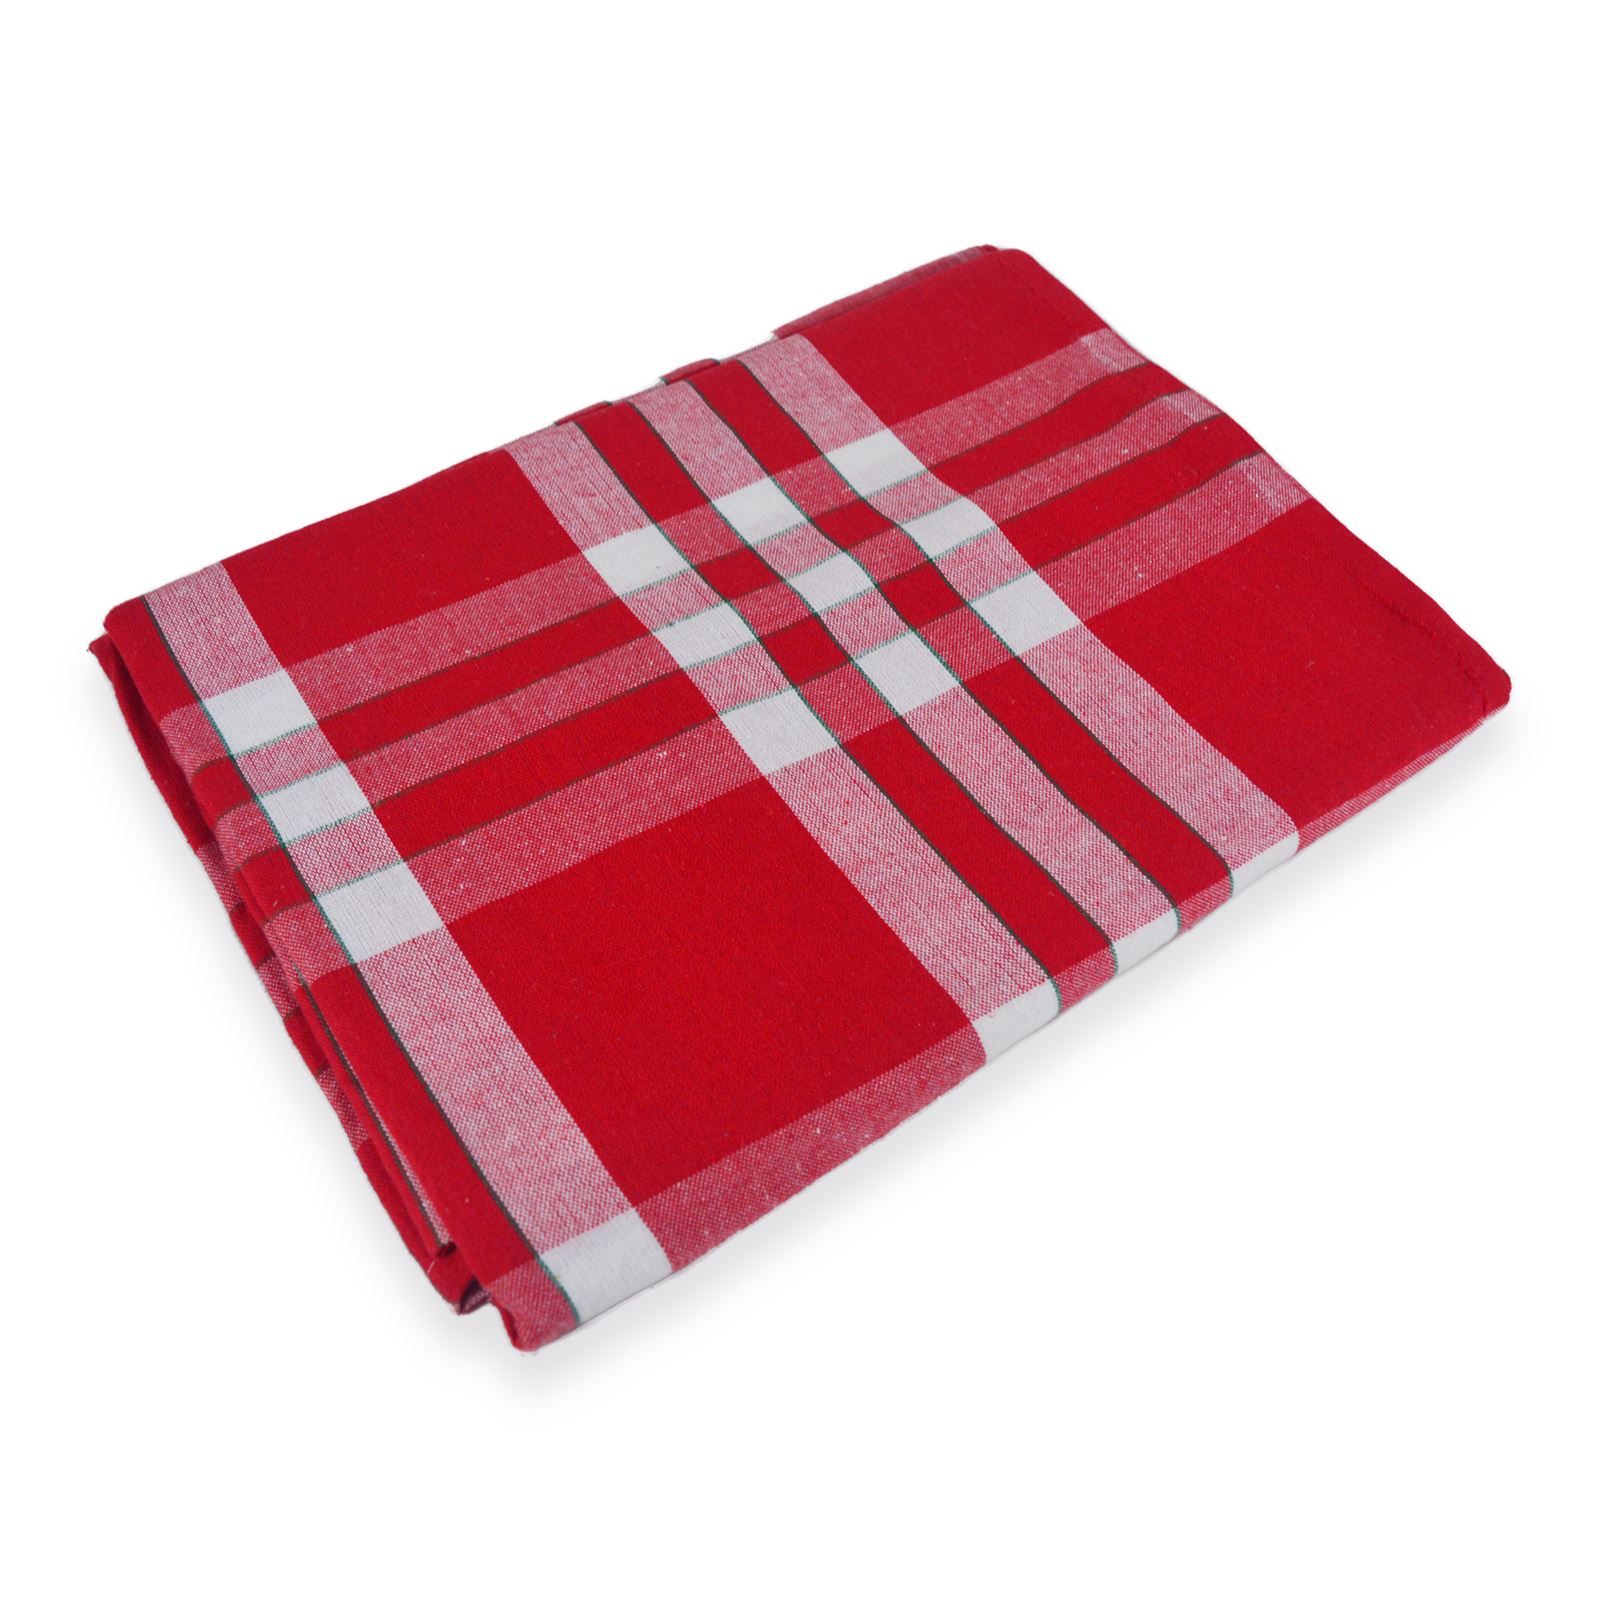 Red Handloom Cotton Bed Sheets 54x80 (Inches) Checkered Style for Double, Single Beds